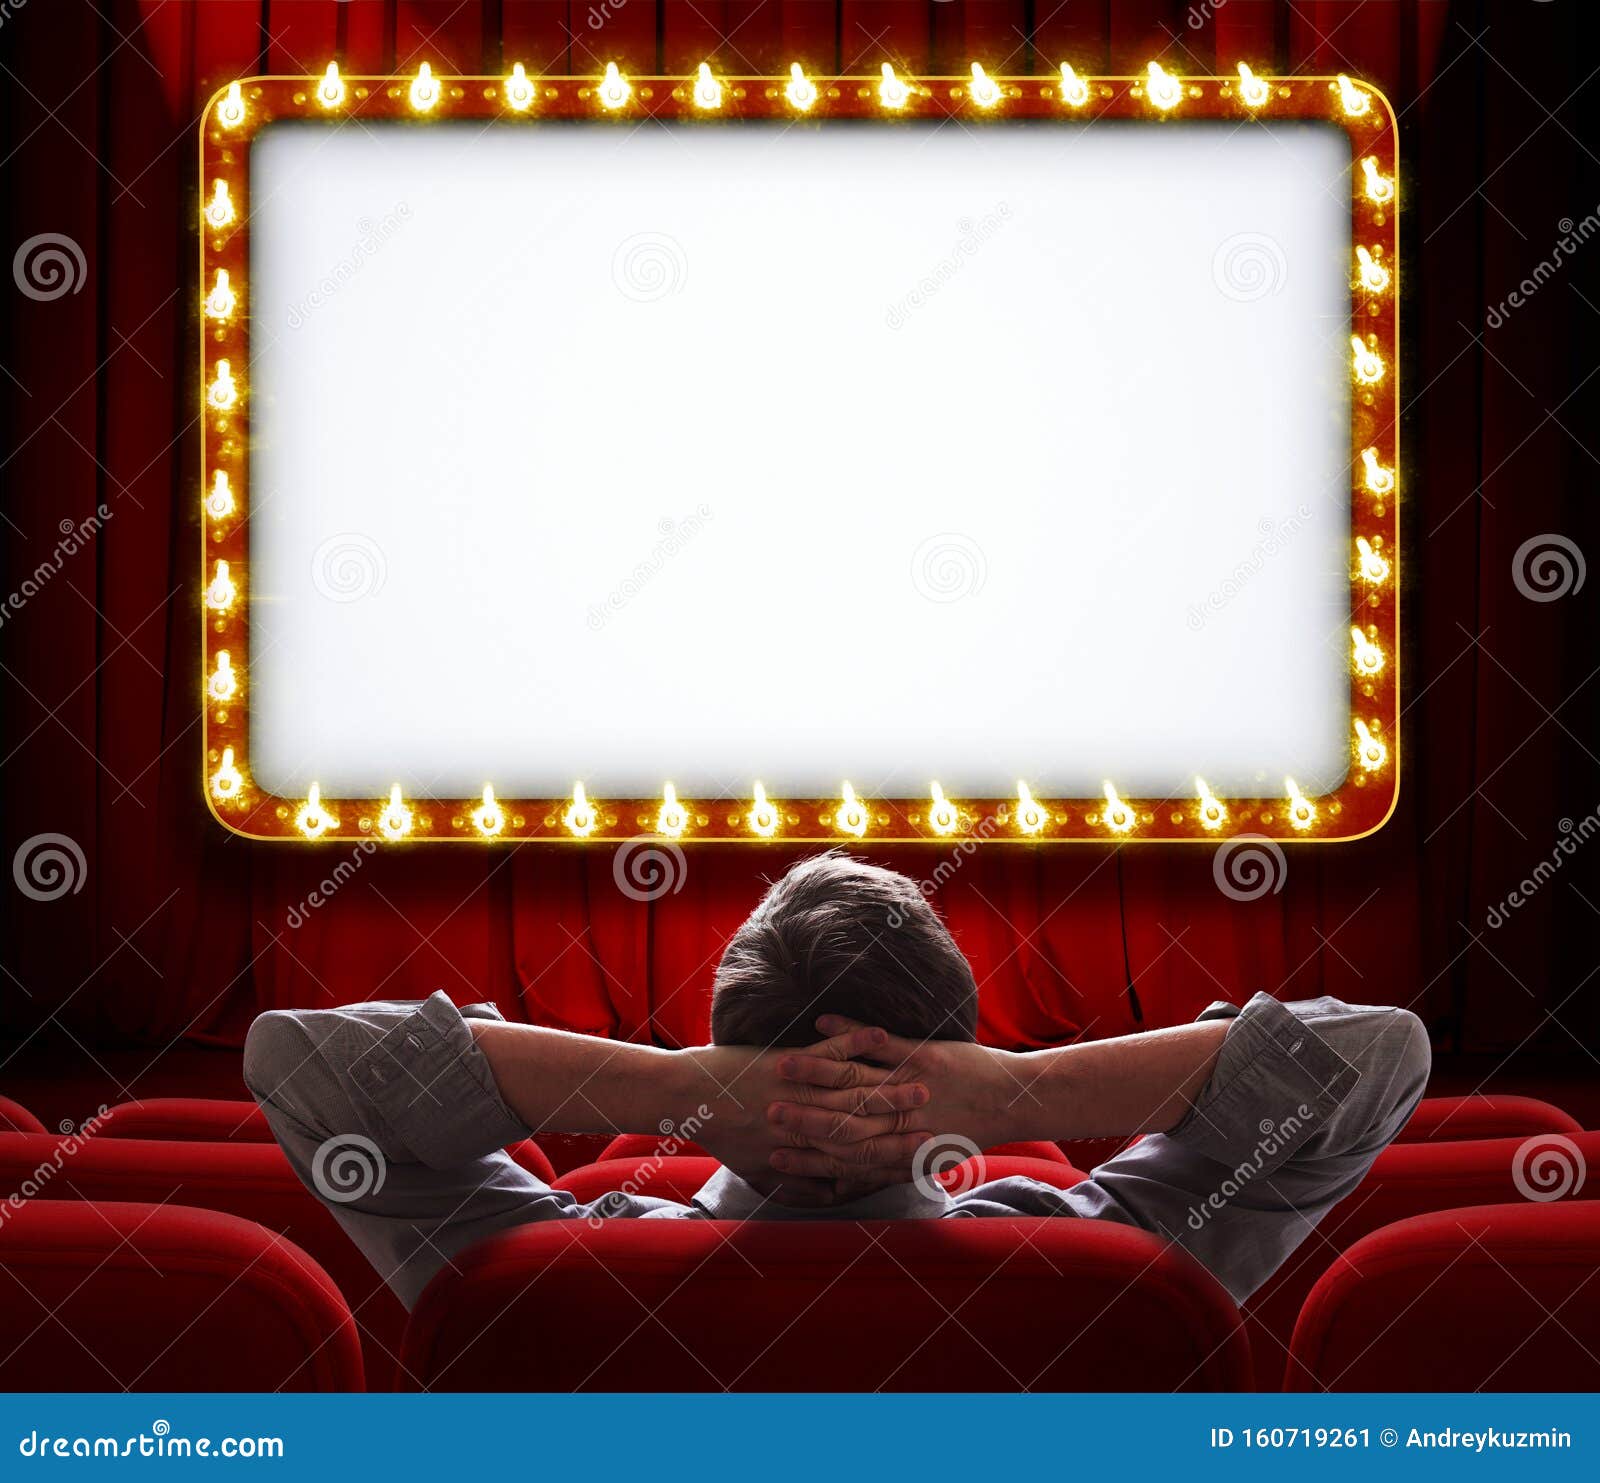 man sitting in front of lighted sign on red theatre curtain